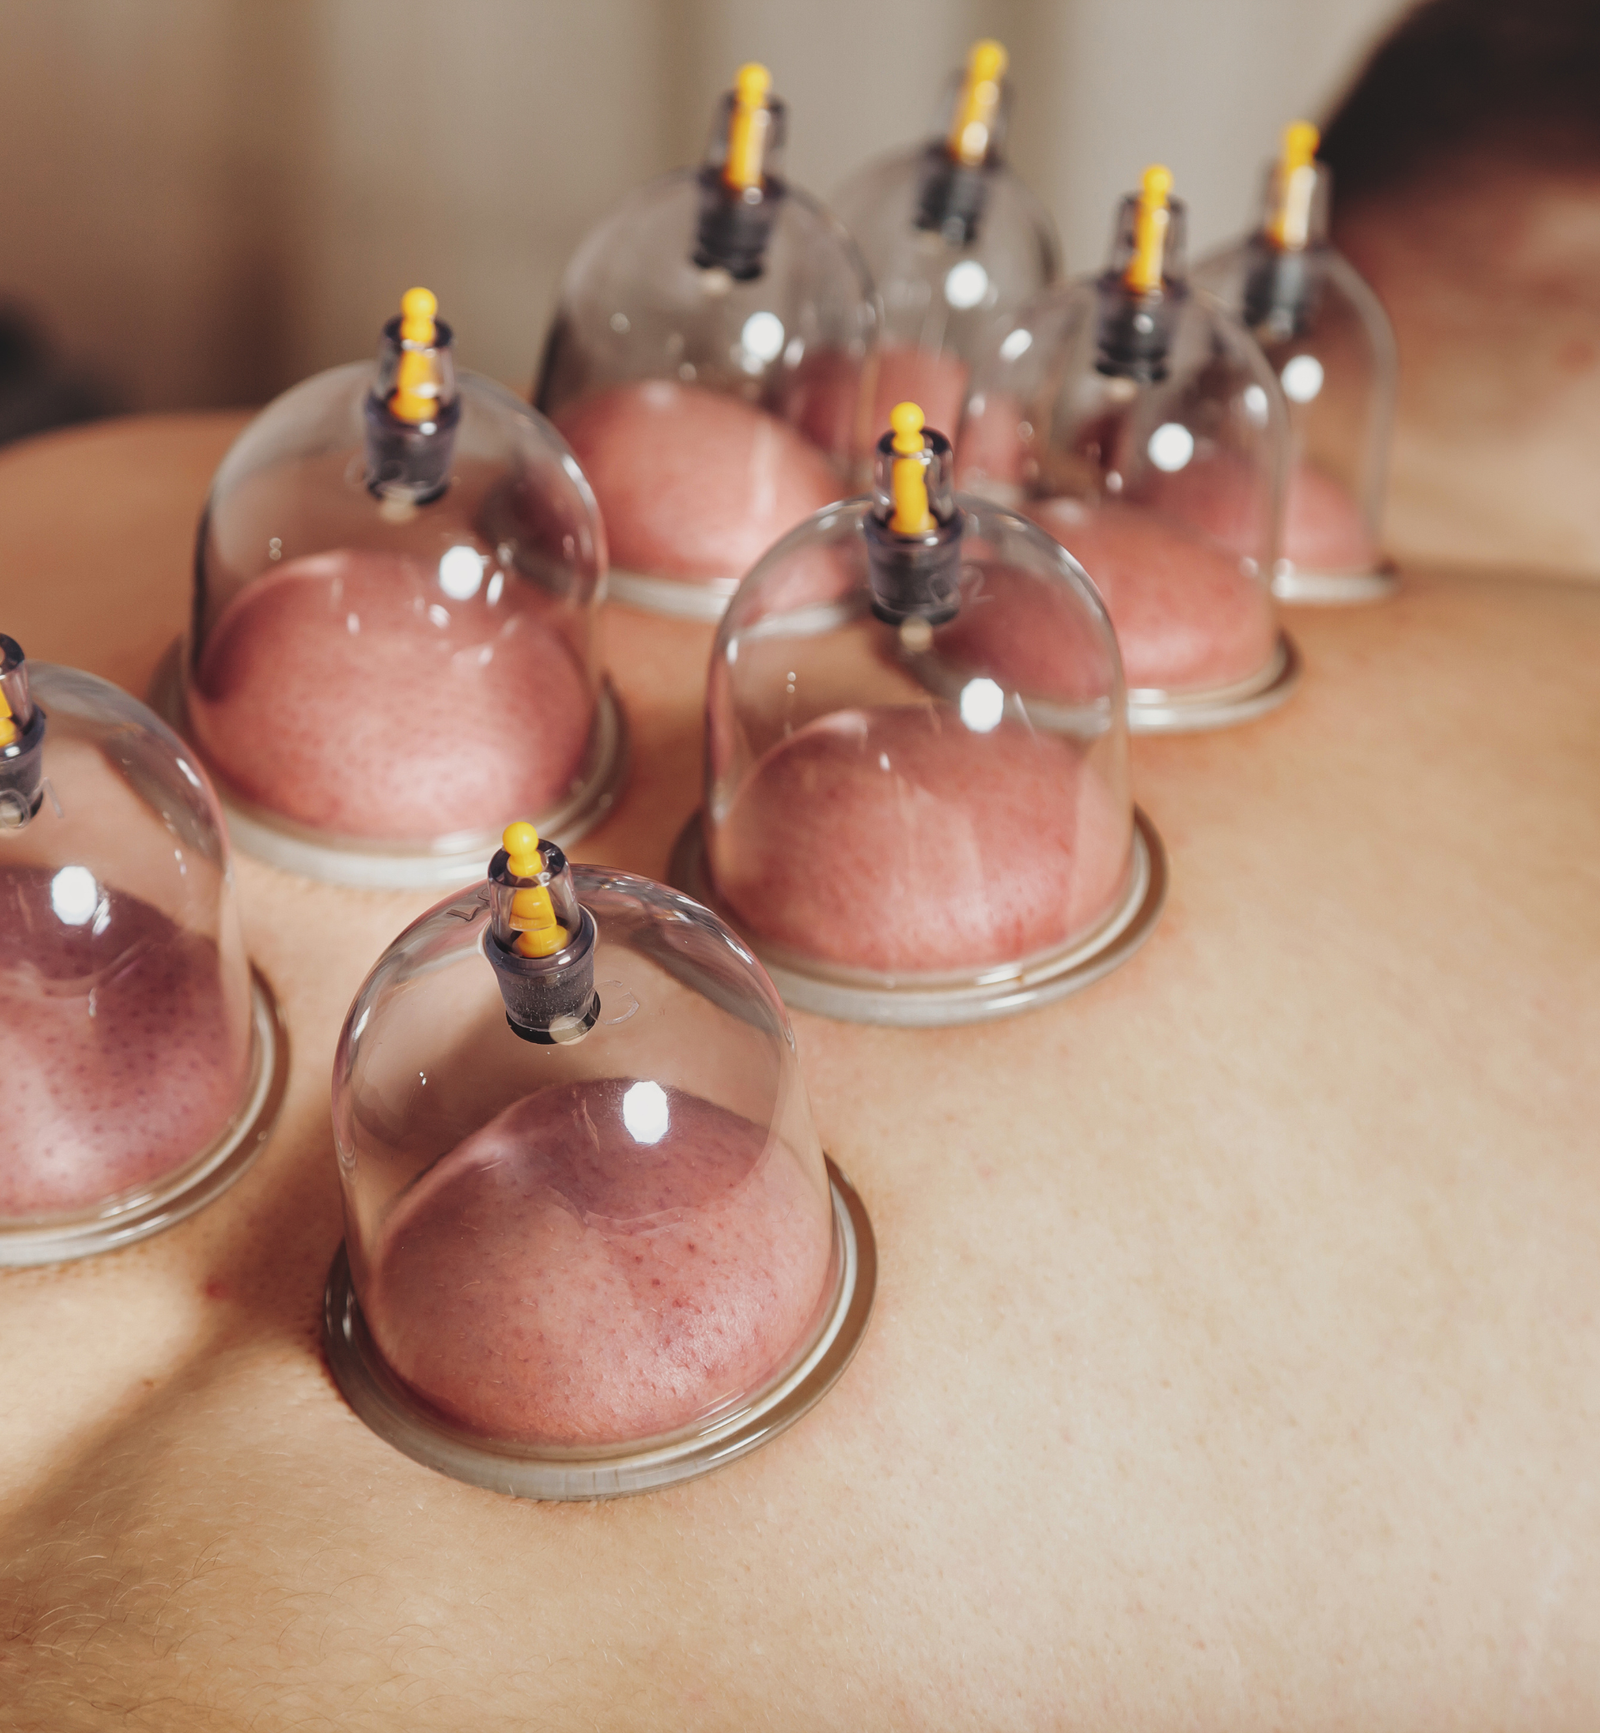 Dry cupping